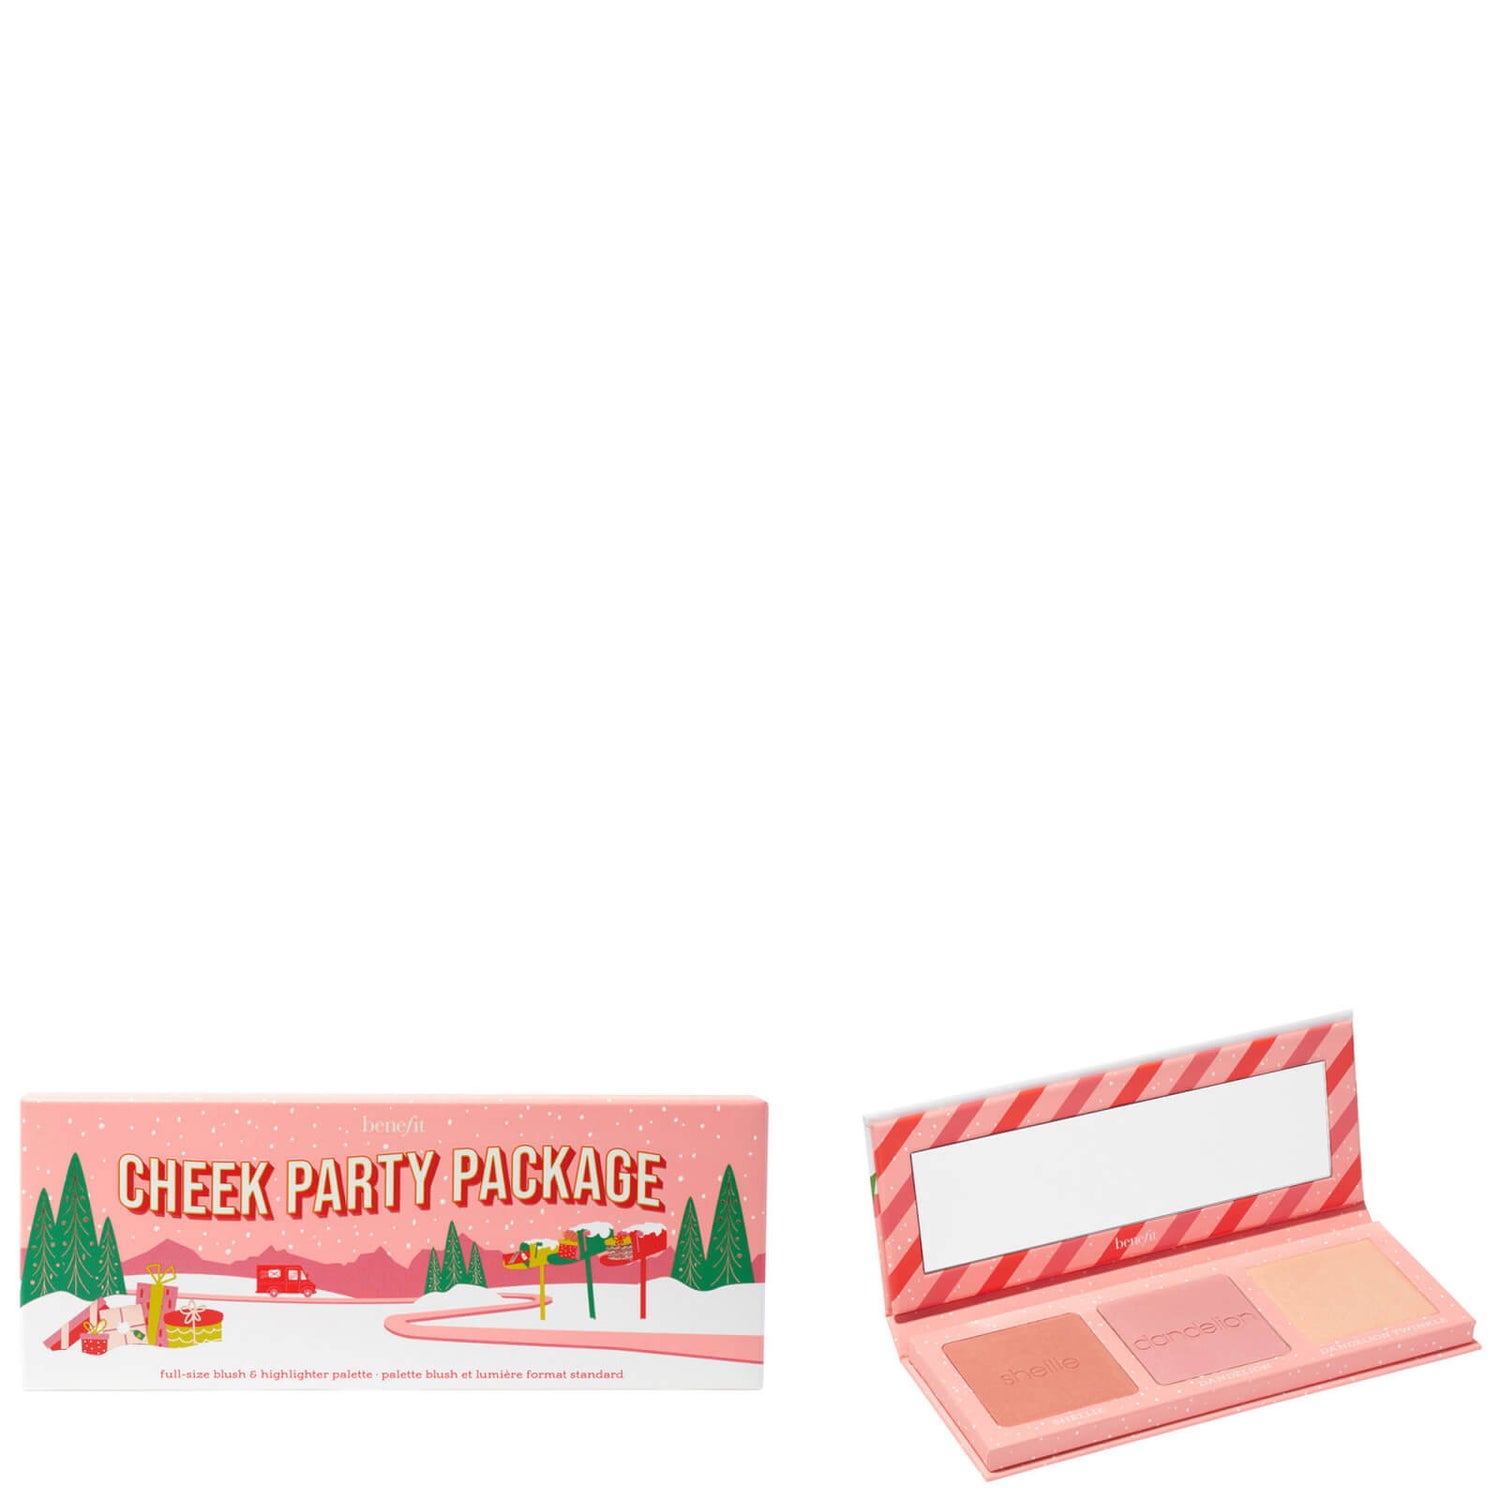 benefit Cheek Party Package Blusher and Highlighter Cheek Palette (Worth £83.50)